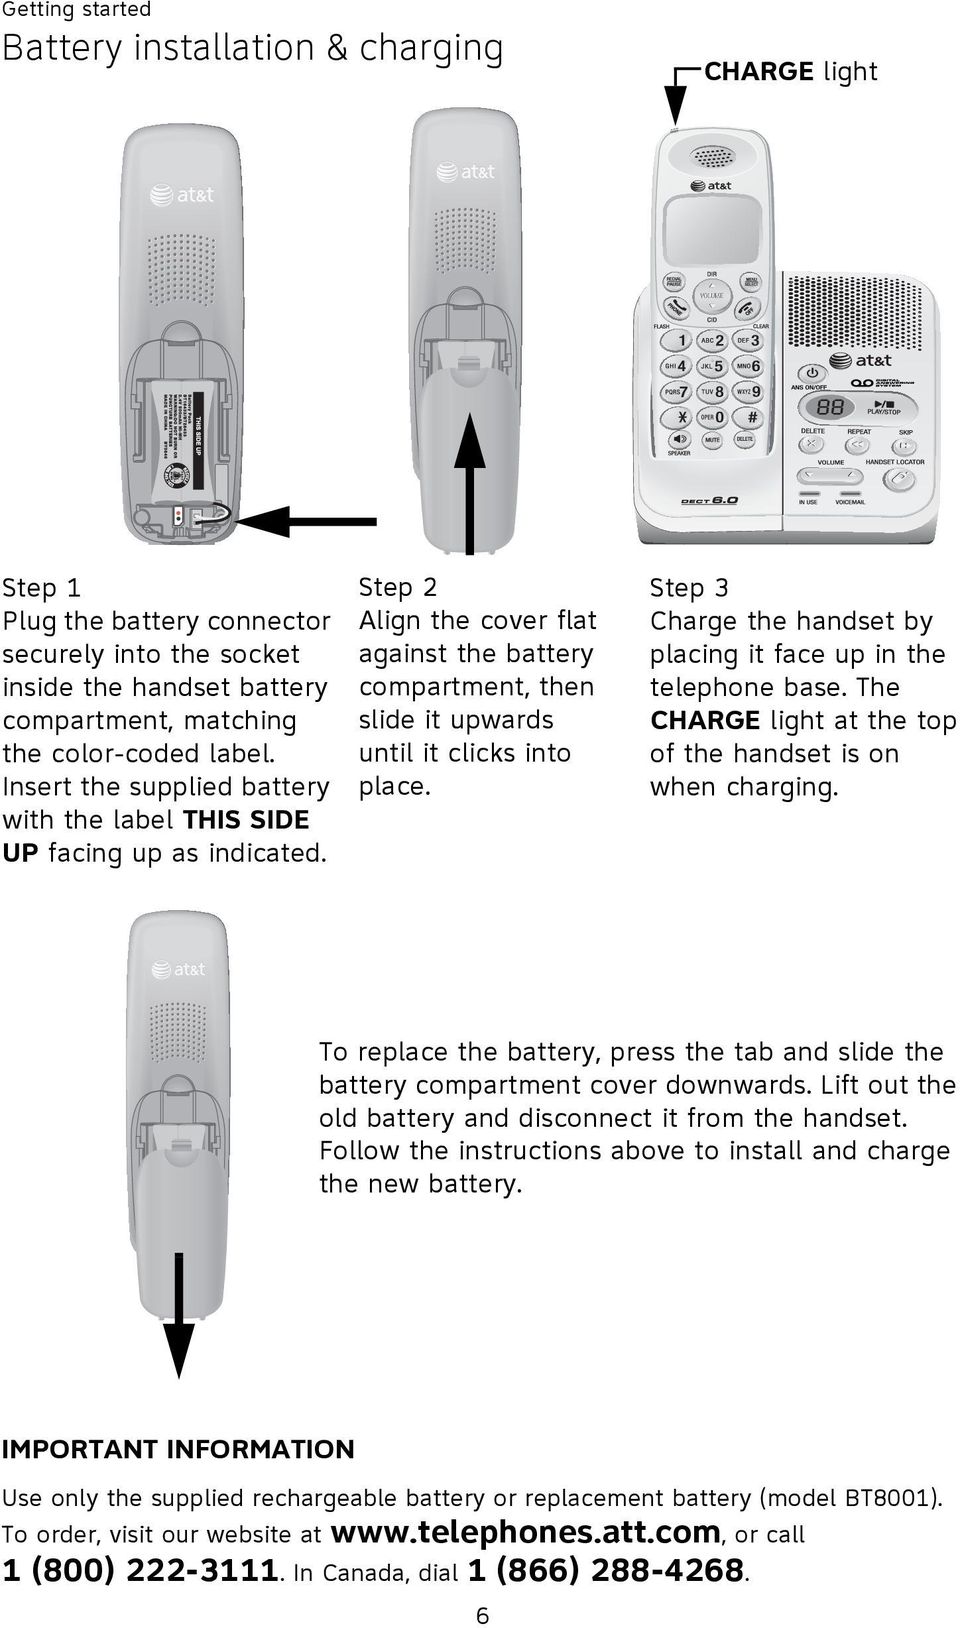 Step 3 Charge the handset by placing it face up in the telephone base. The CHARGE light at the top of the handset is on when charging.